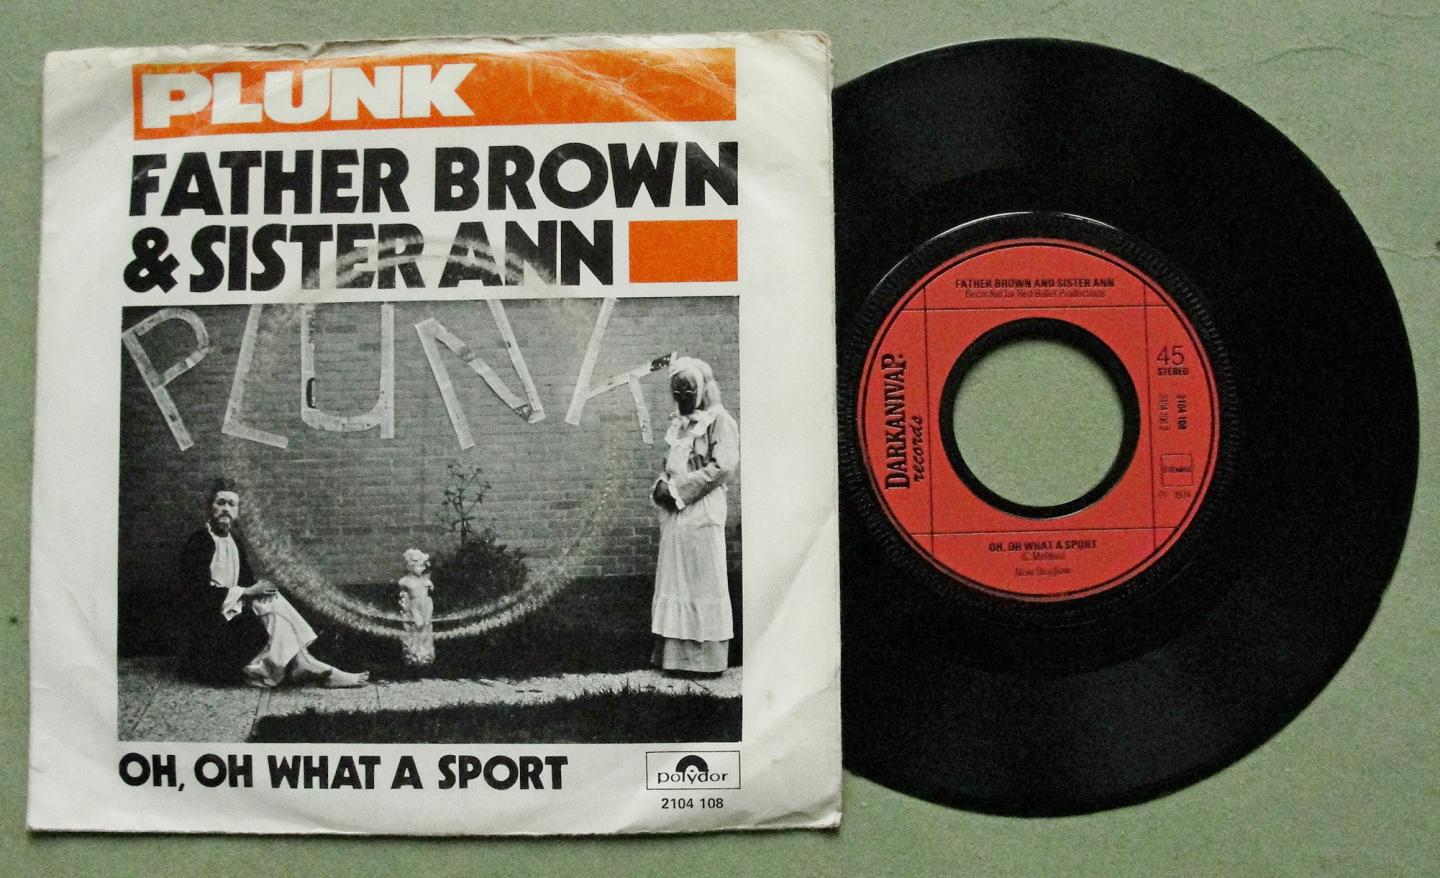 Fluxus; Darkanivap (= label Wim T. Schippers): FATHER BROWN & SISTER ANN - PLUNK / OH, OH WHAT A SPORT